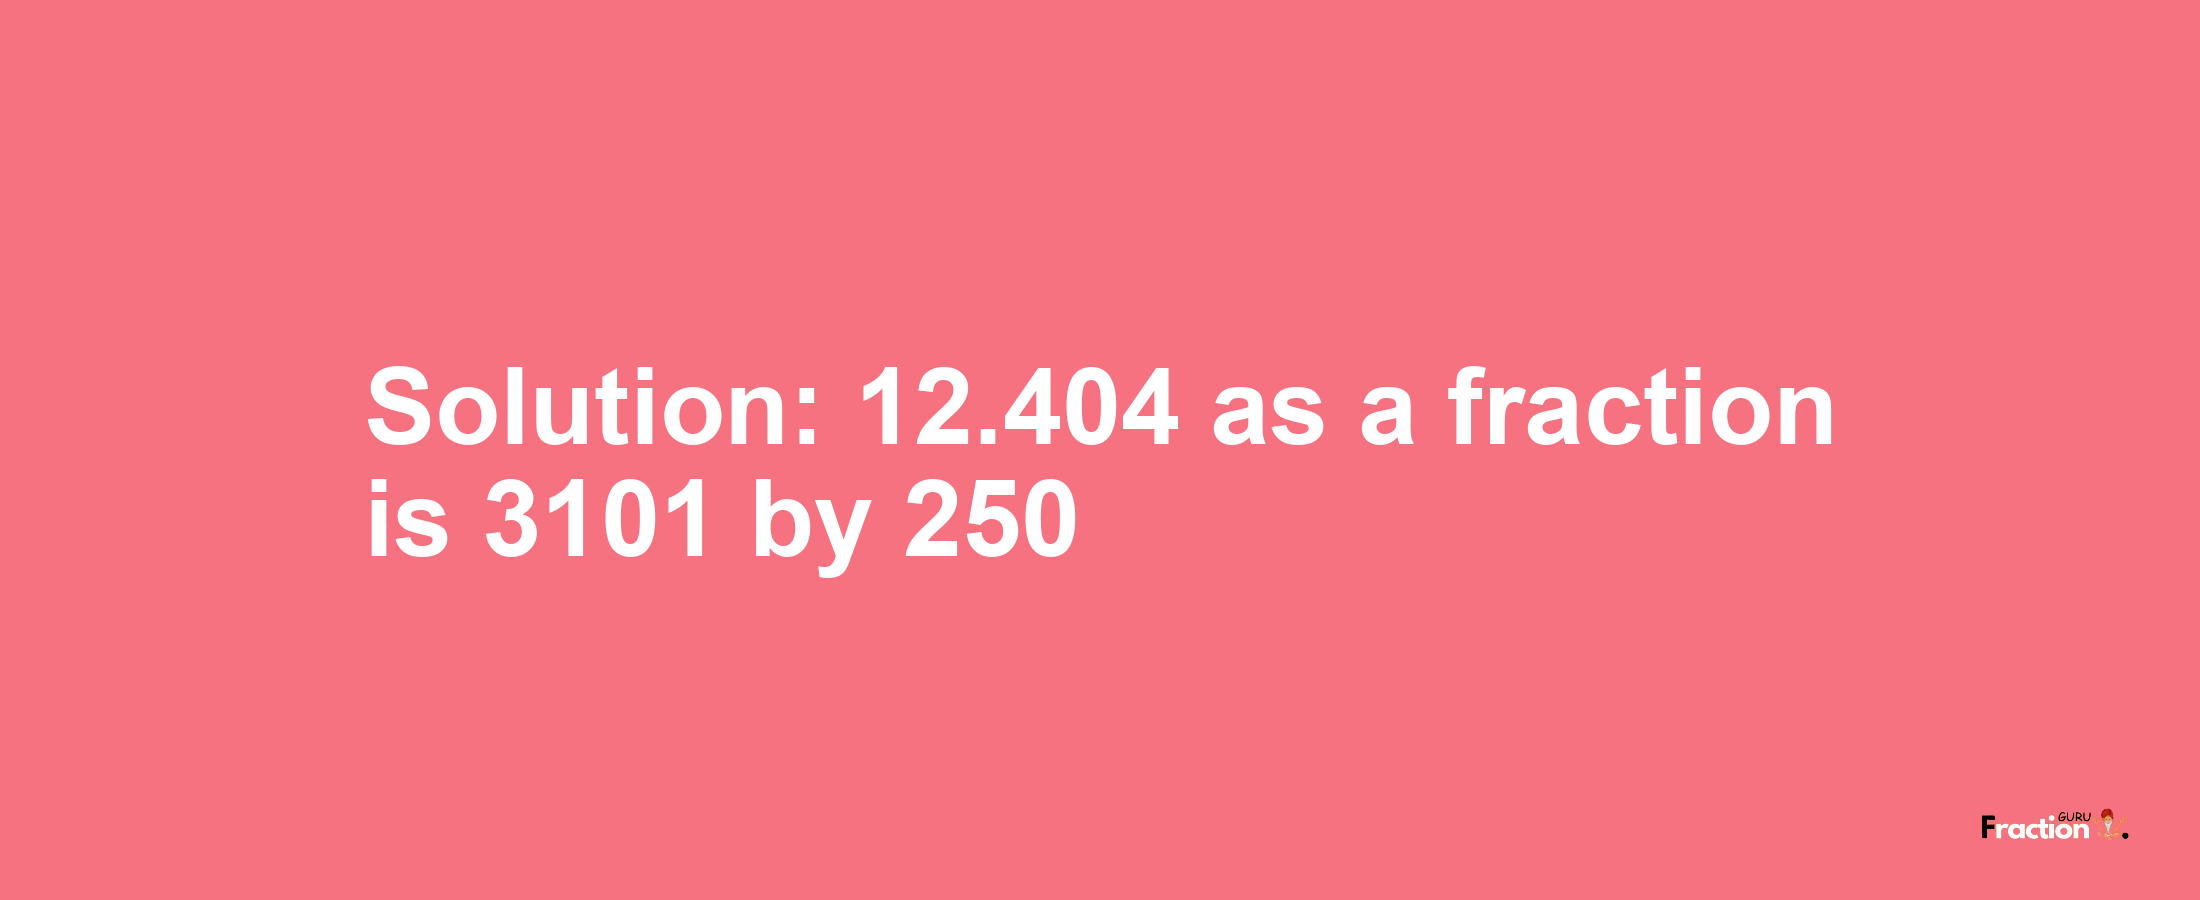 Solution:12.404 as a fraction is 3101/250